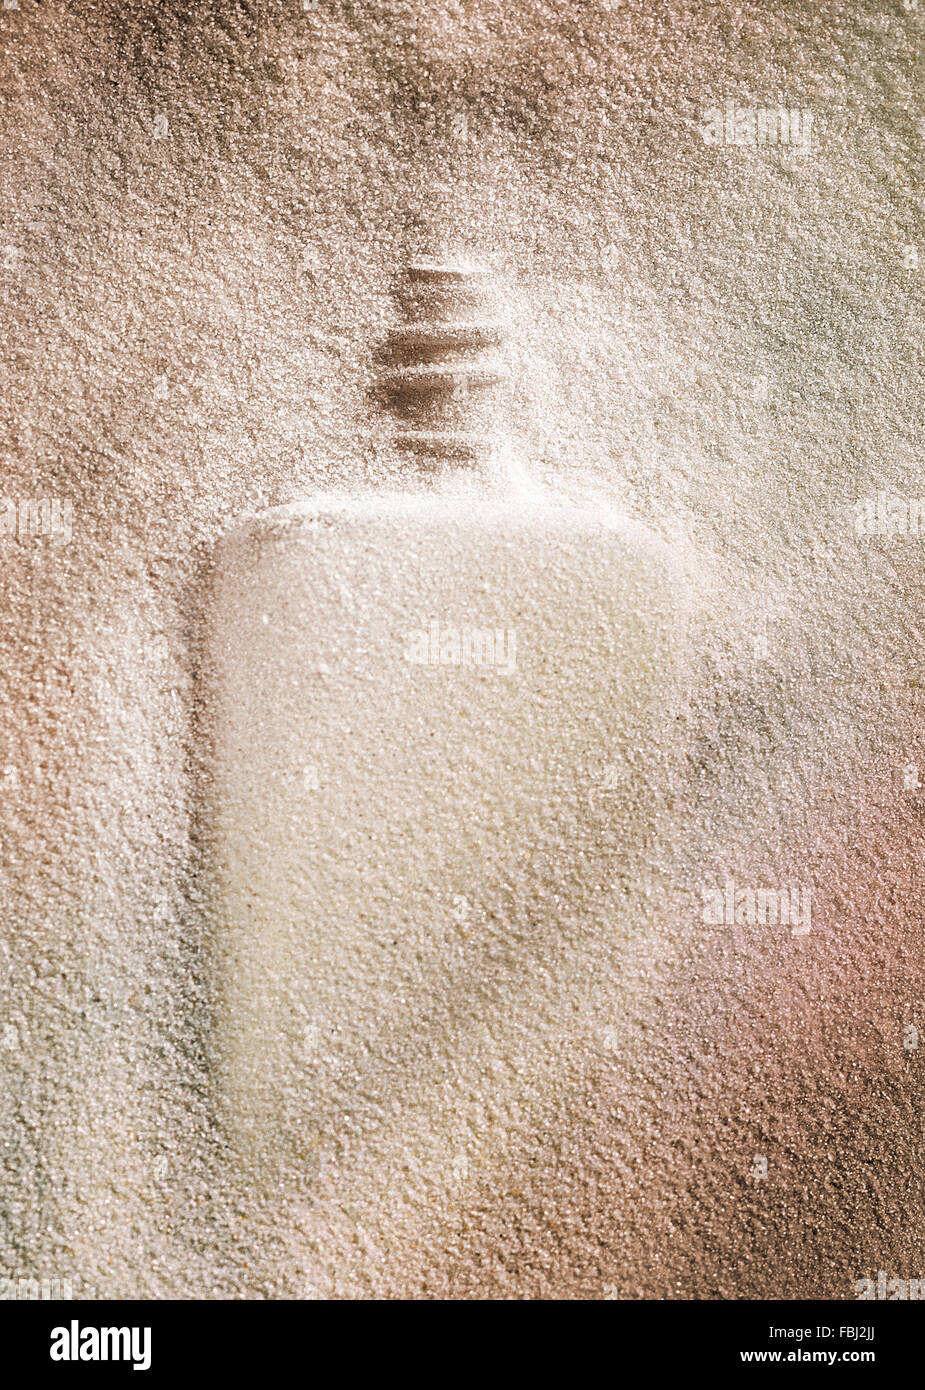 Bottle silhouette in a raw sand glass material Stock Photo